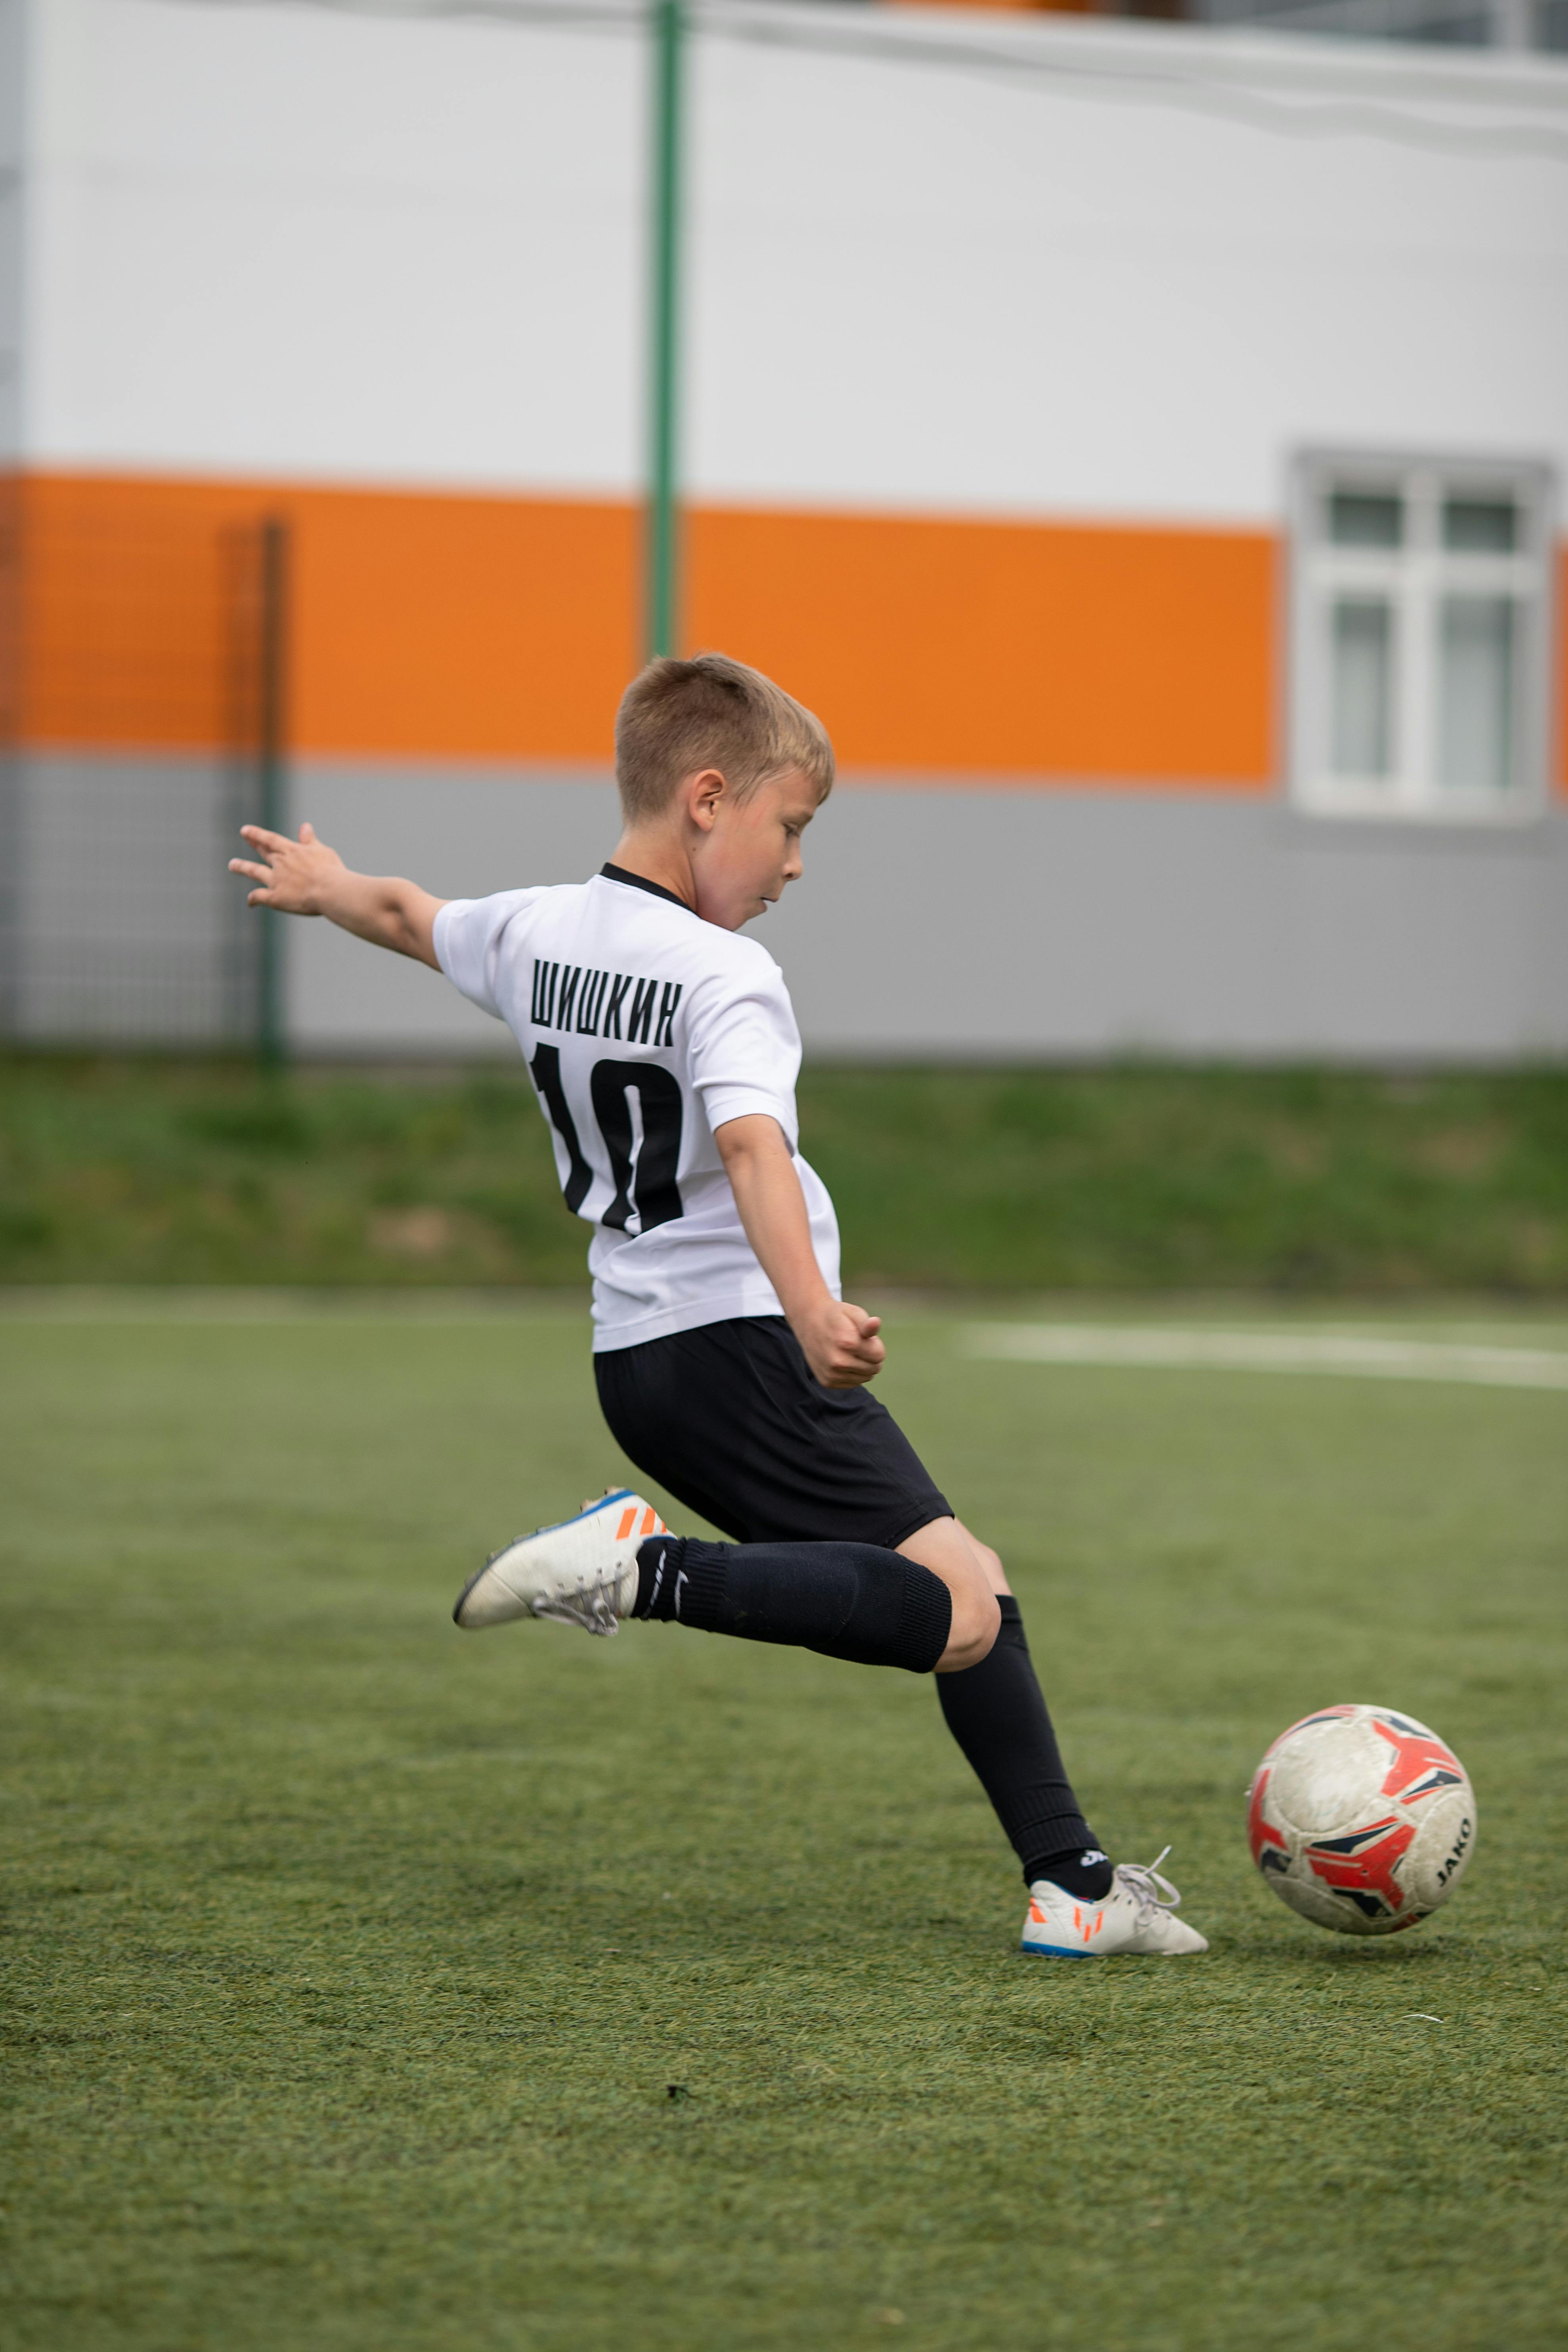 boy in white jersey playing soccer